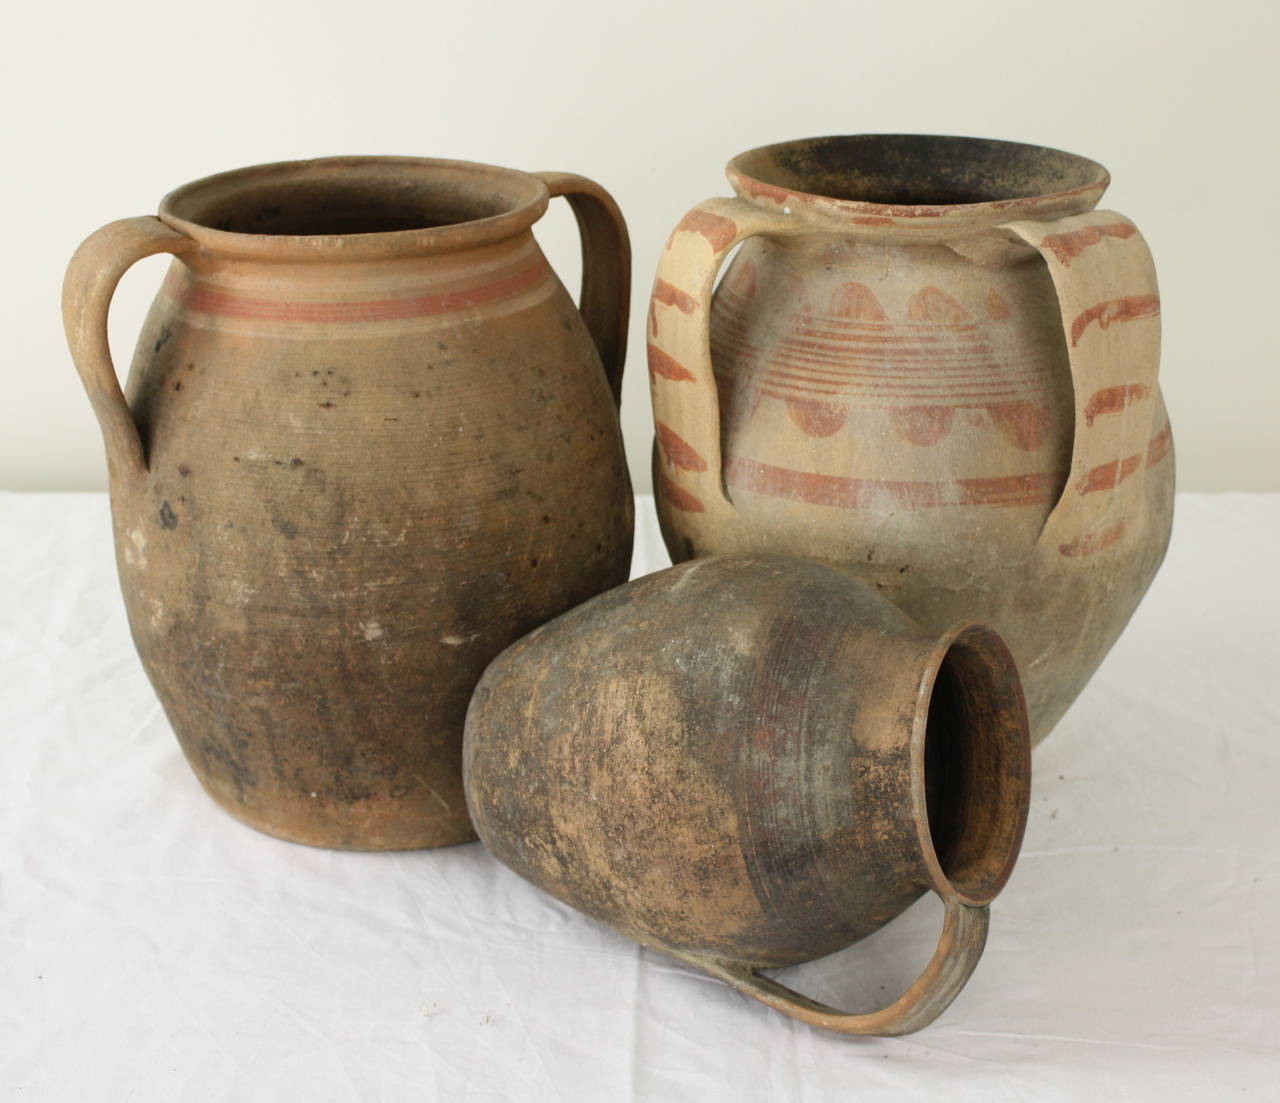 A most interesting group of pots, great dimensions and colors.  Hand thrown, blackened from the fire.  Measurements are for the largest jug.  The smallest measures 7